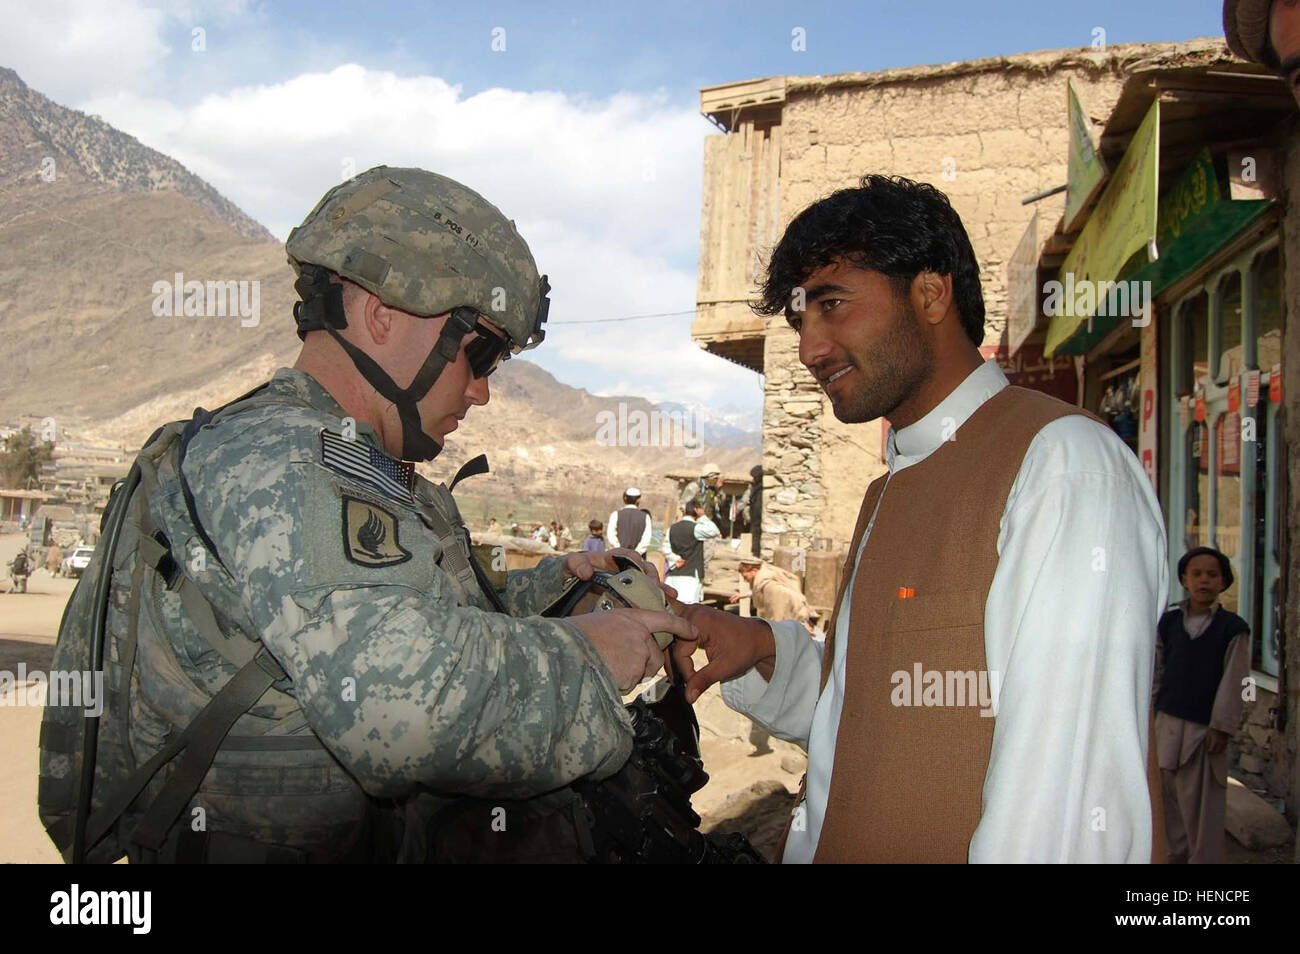 Army Pvt. Kevin Coons, 22, of Wichita, Kan., a forward observer with 1st Platoon, Chosen Company, 2nd Battalion, 503rd Infantry Regiment, scans a local shop owner's fingerprints using the Handheld Interagency Identity Detection Equipment System during a presence patrol Feb. 24 to the village of Nangalam, Kunar province, Afghanistan. Chosen Company Maintains Presence in Nangalam 79934 Stock Photo